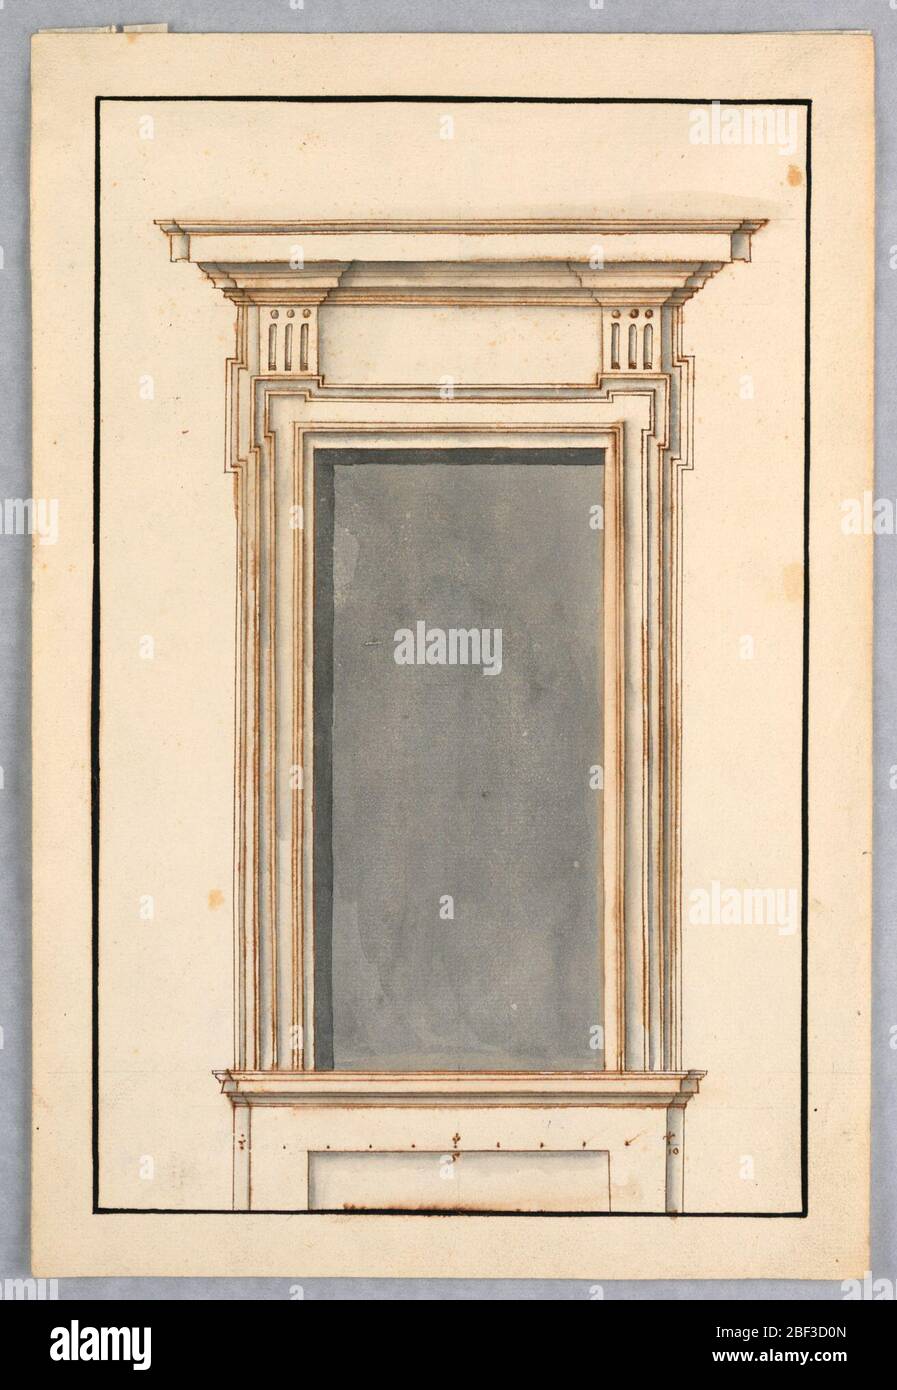 Project for a Window Case. Elevation of door frame with a straight entablature supported by two consoles with triglyphs. Below is a dado with scale. Stock Photo